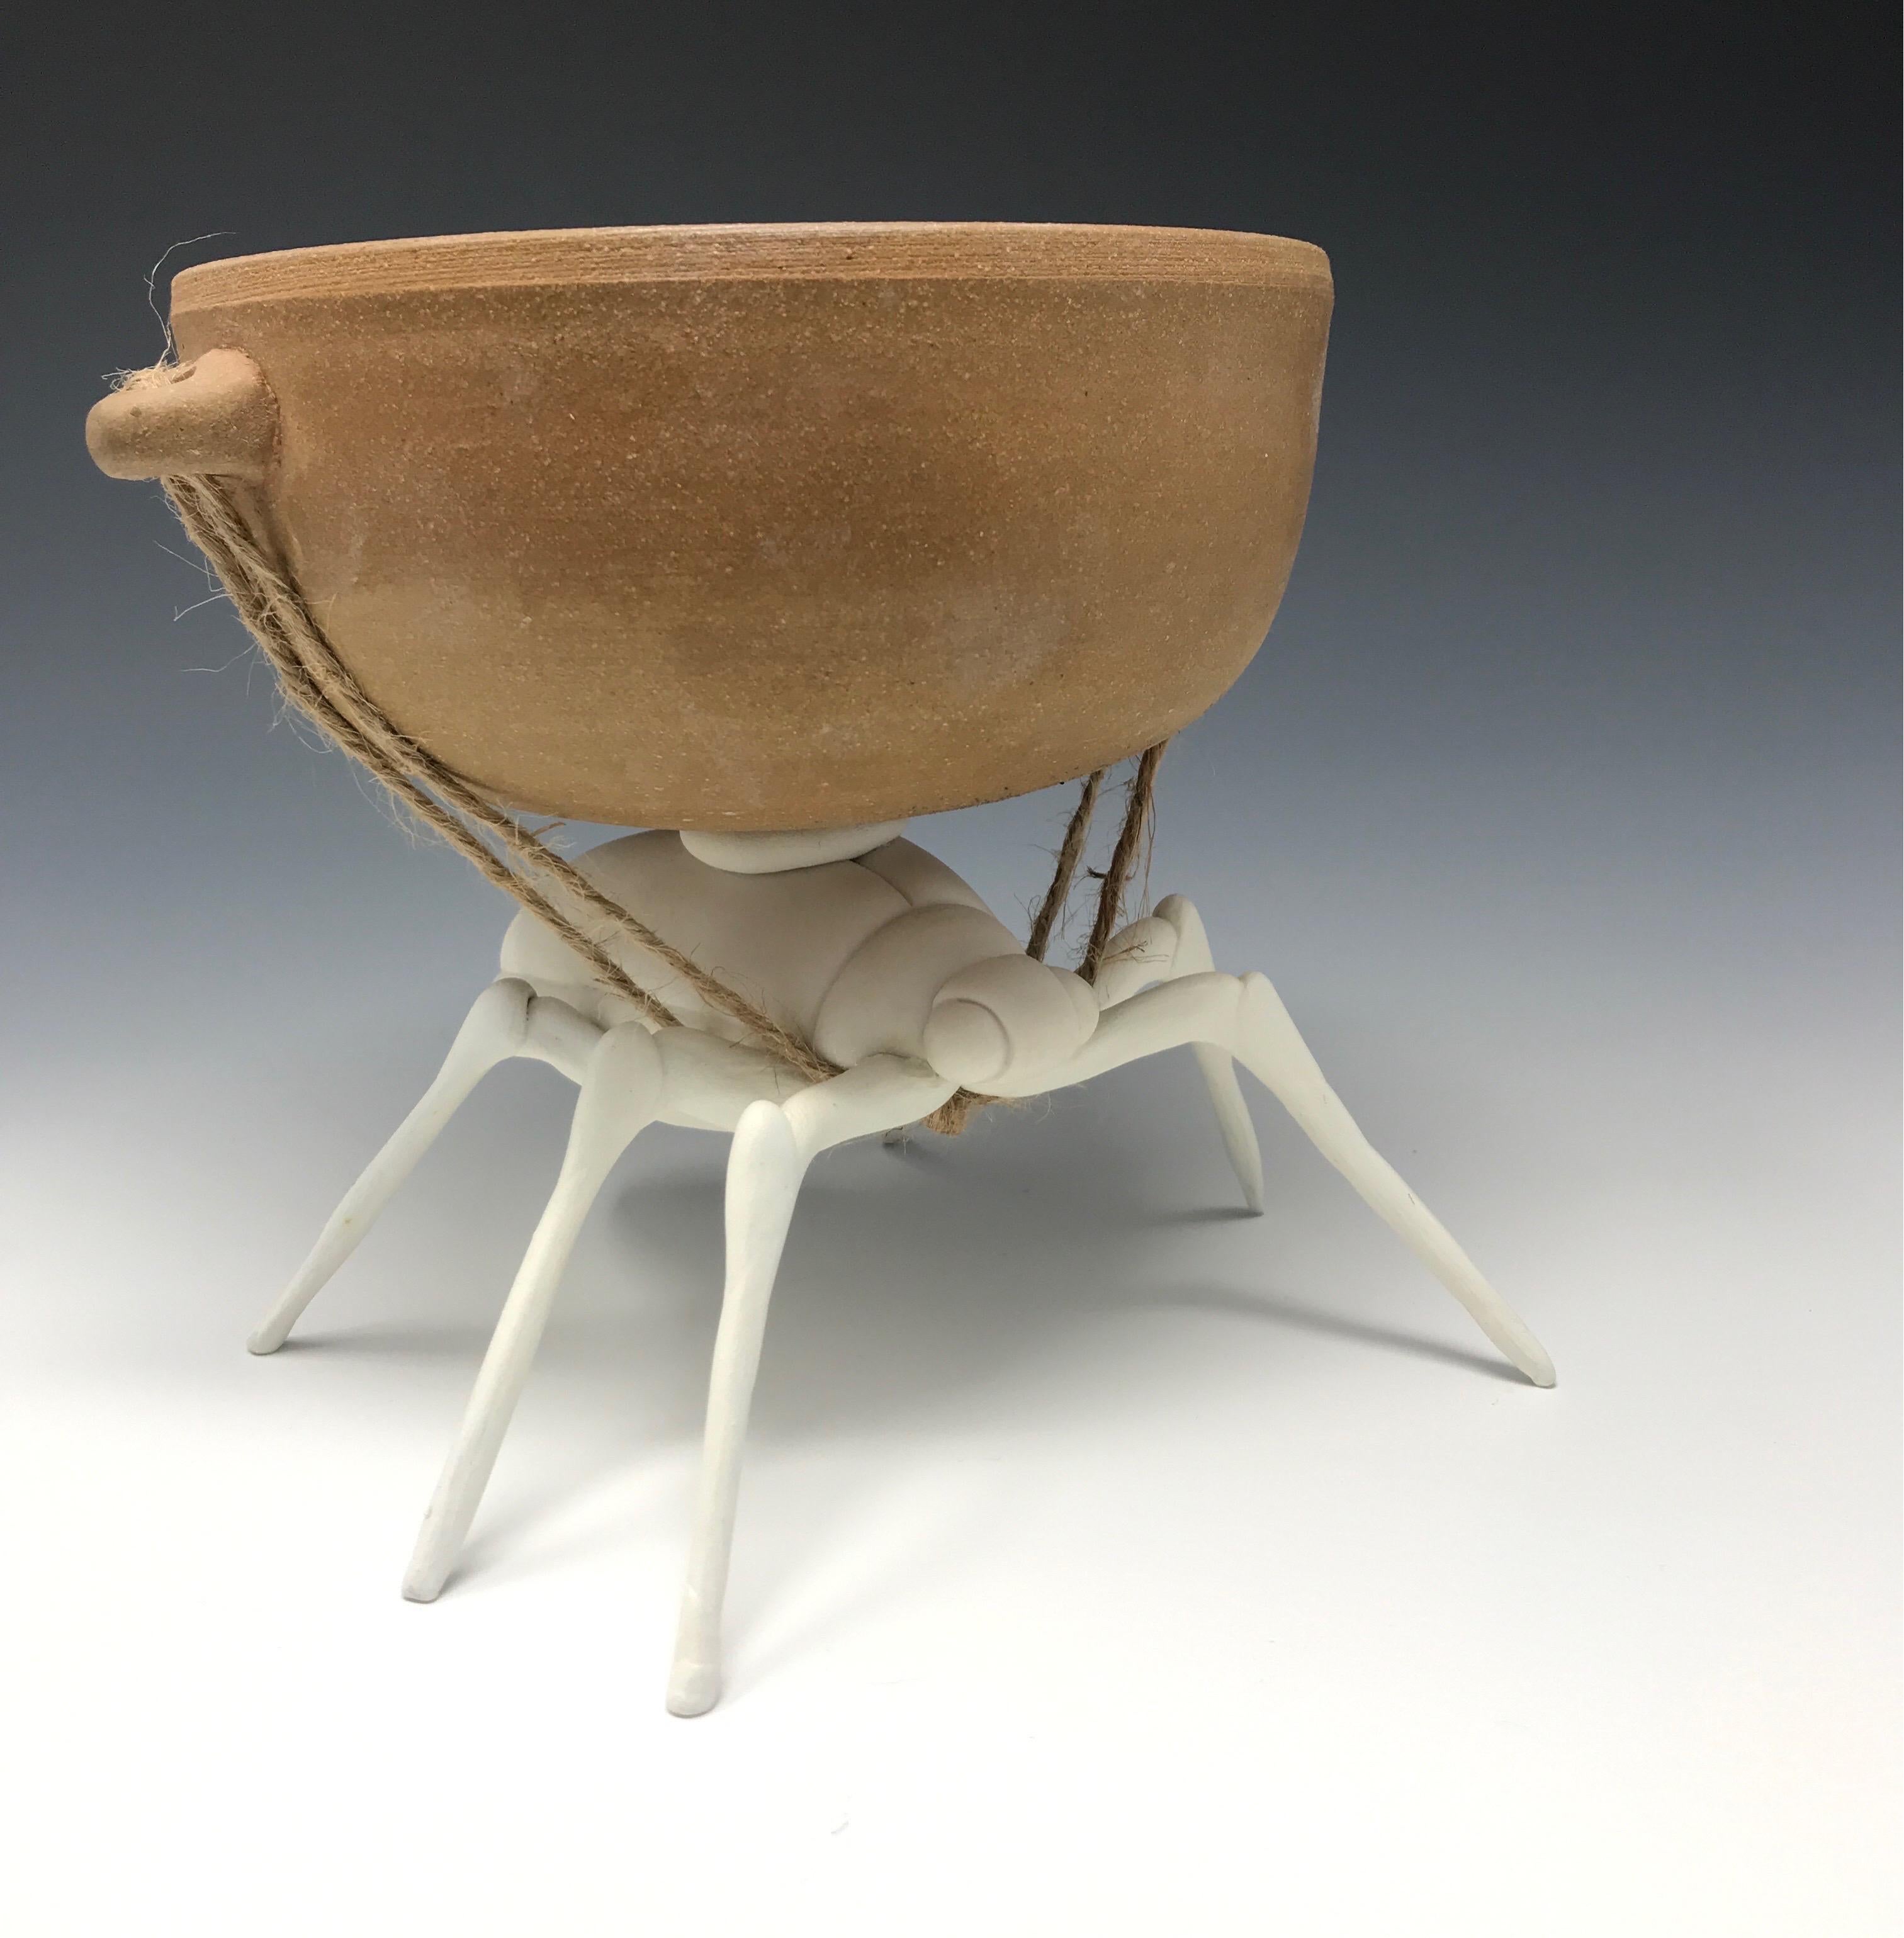 This hand built porcelain beetle with resilient wire and epoxy clay legs hauling a wheel-thrown earthenware bowl was created by New York artist, Bethany Krull.  A thought provoking functional serving vessel that questions the idea of servitude is